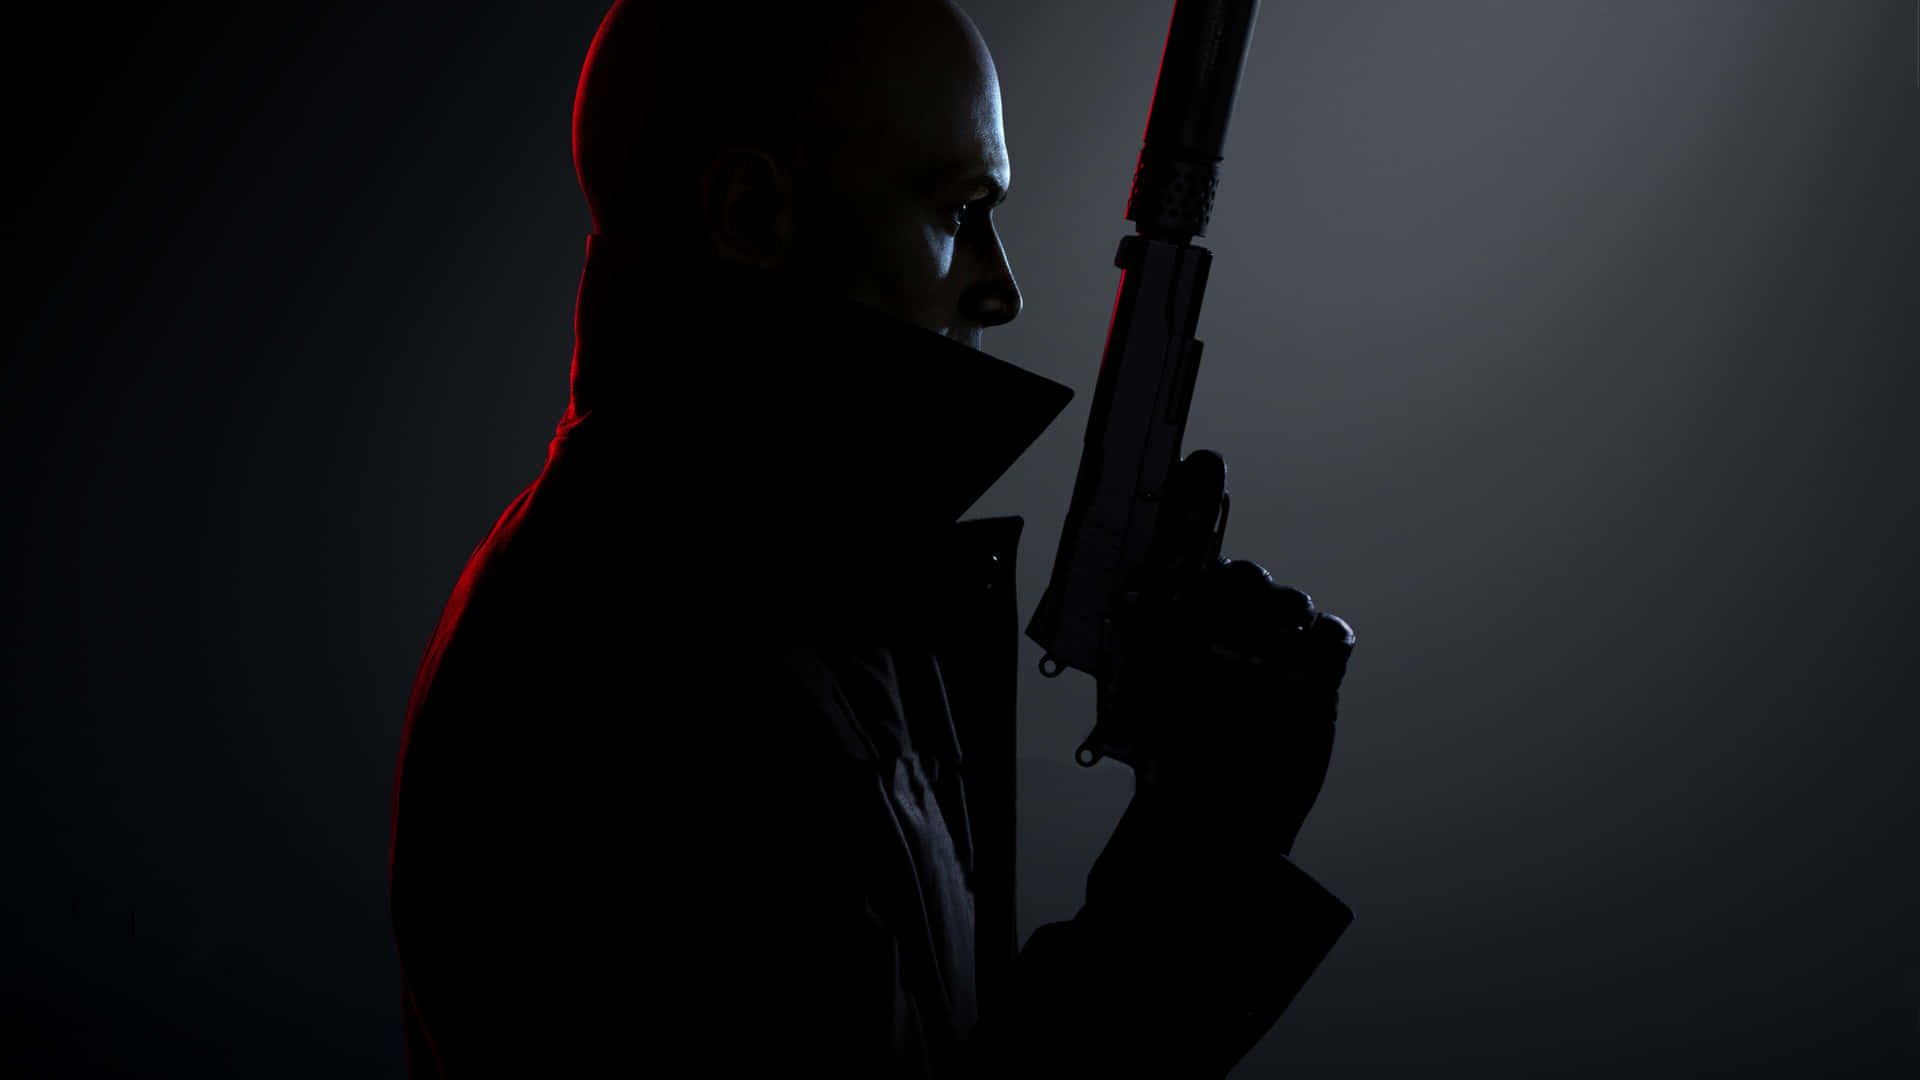 Agent 47 sneaking through the shadows in Hitman 3 Wallpaper